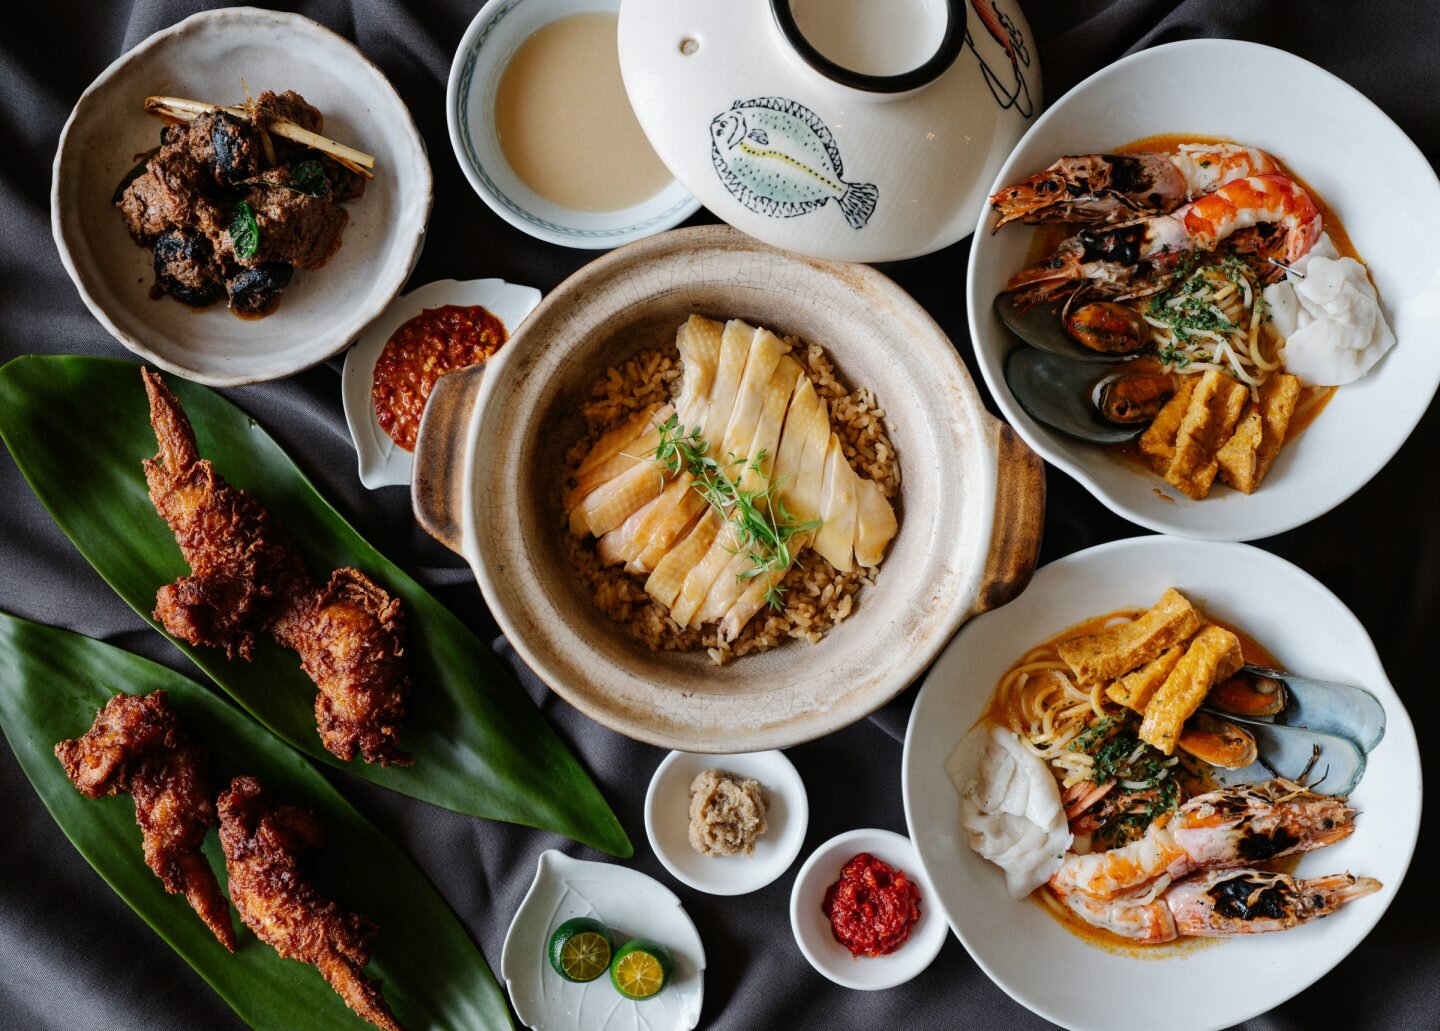 Three New Local Restaurants Flying The Singapore Flag High